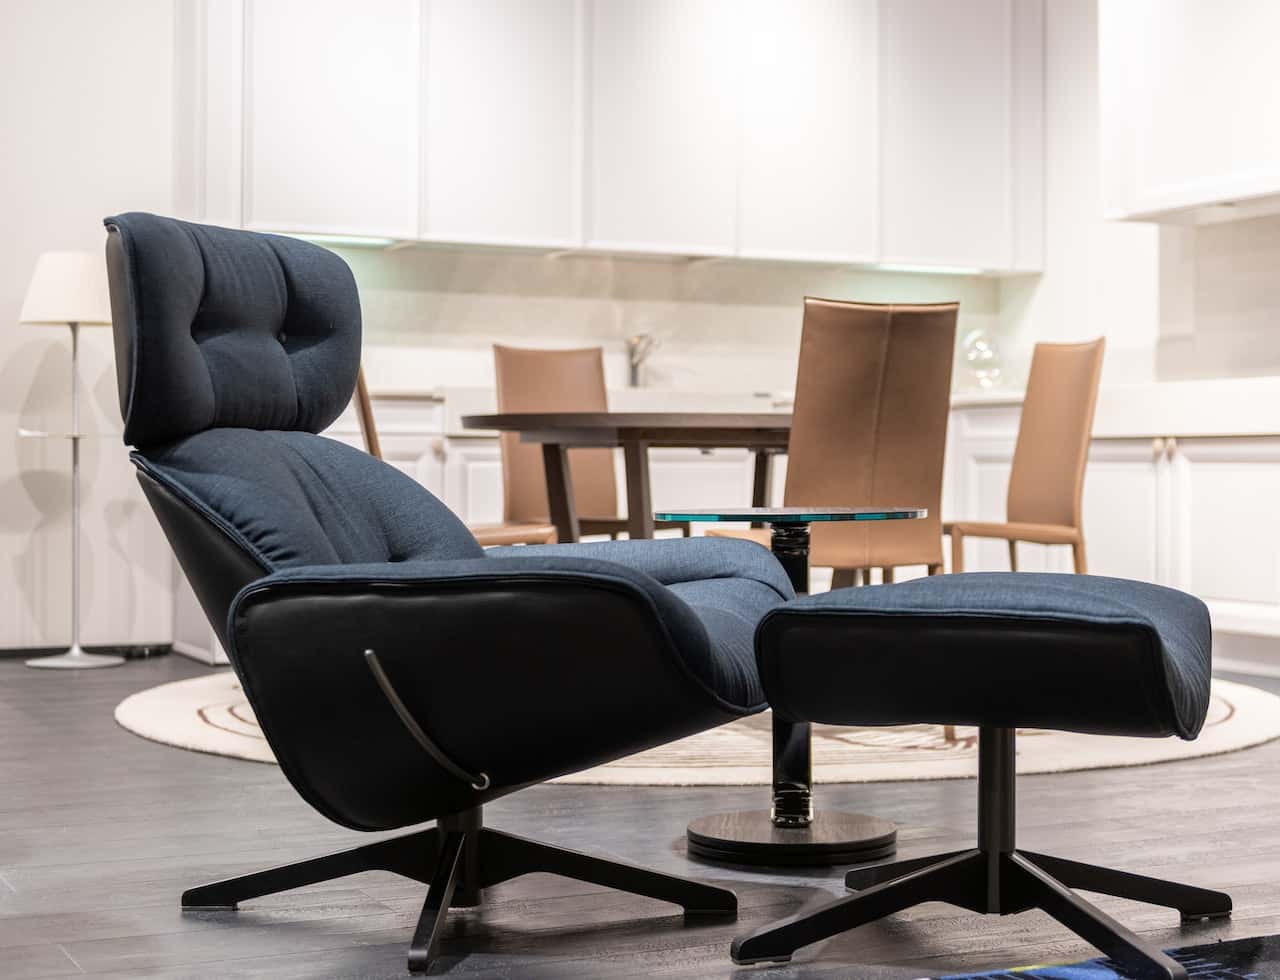 eames-style lounge chair